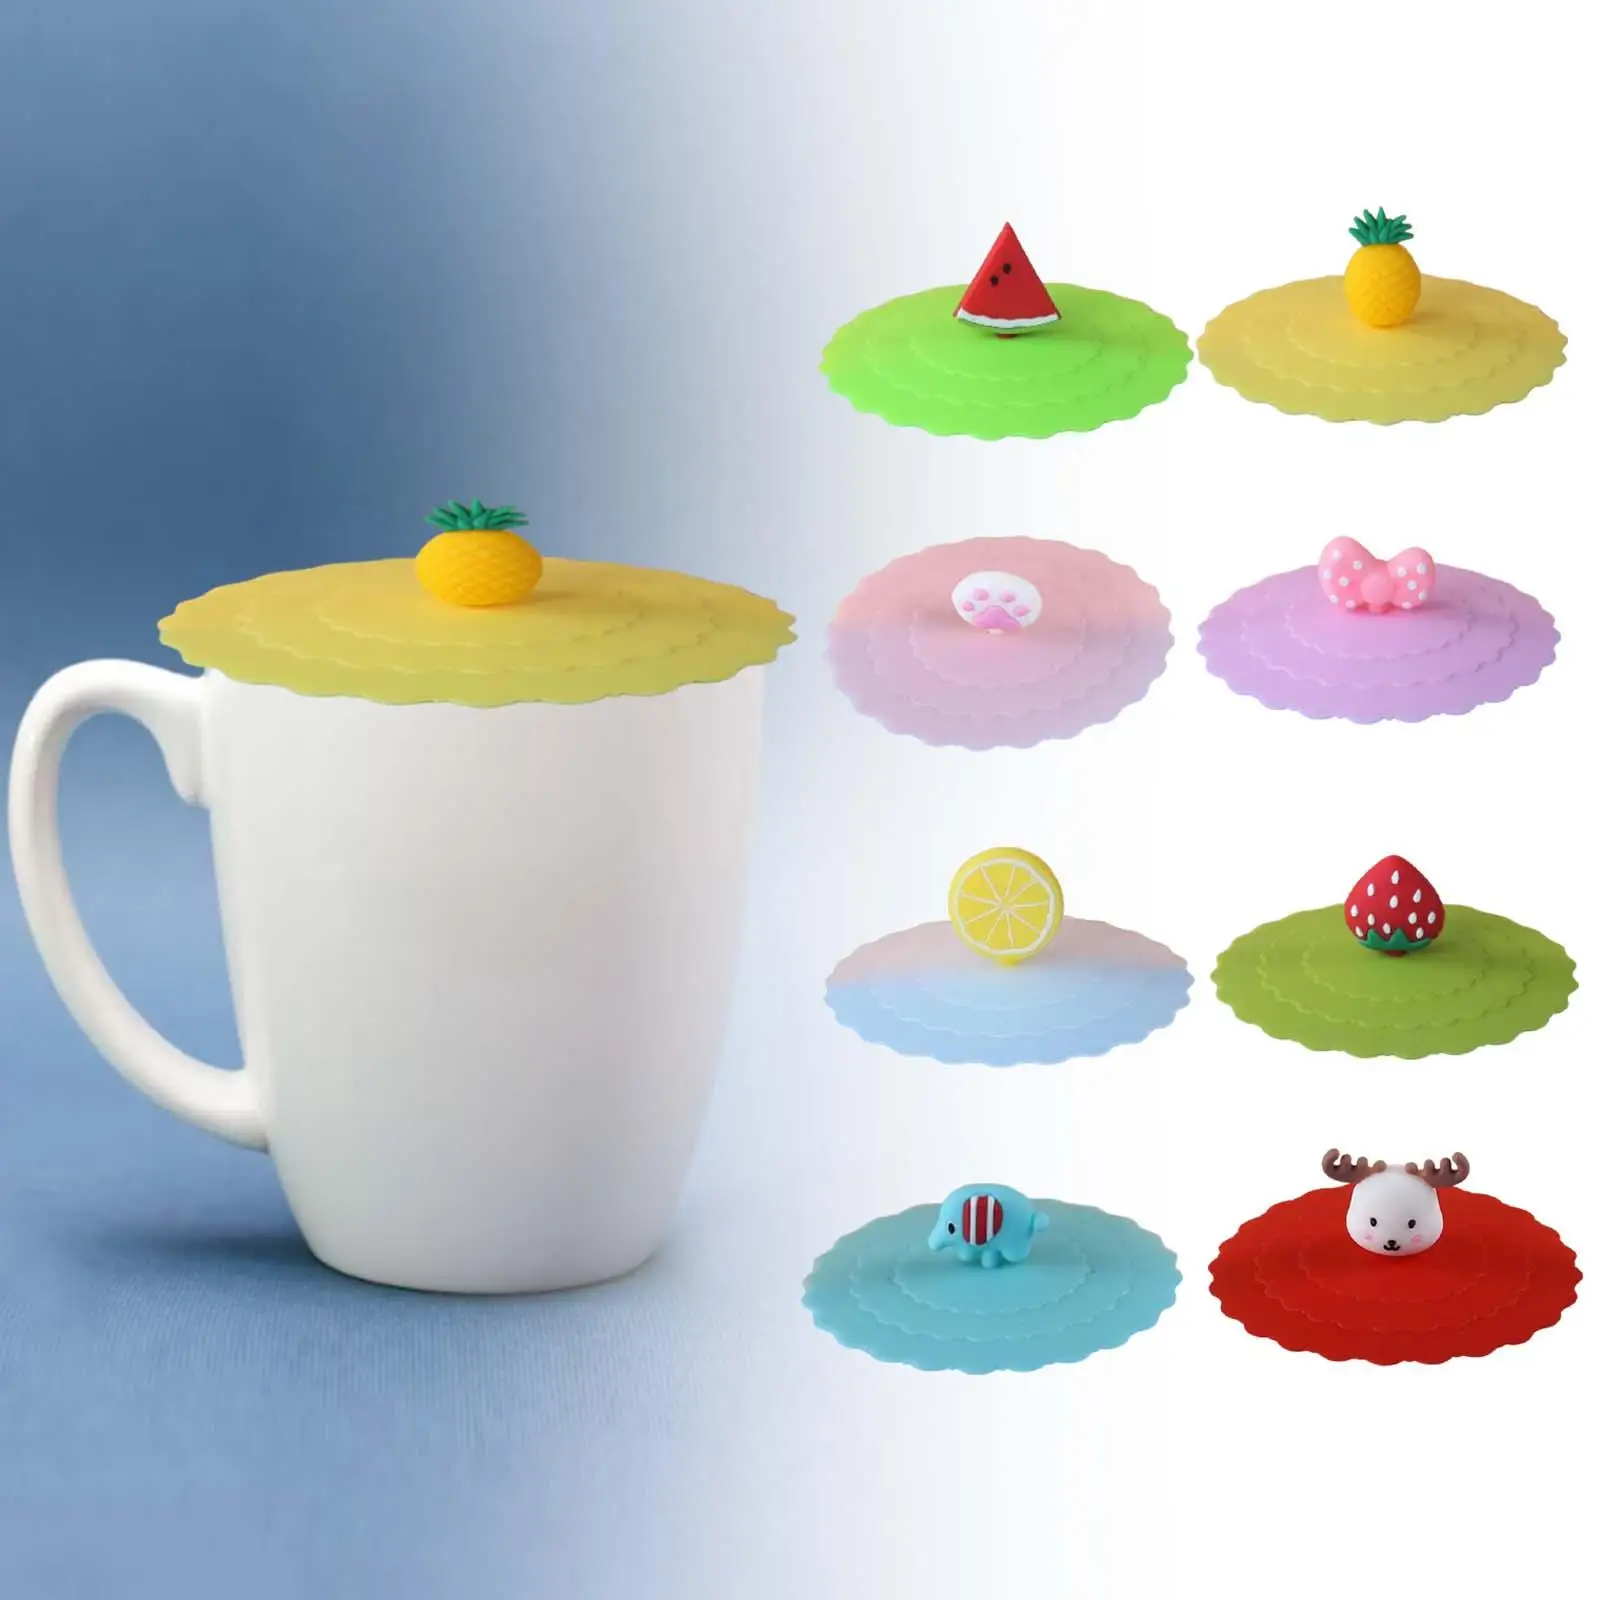 8x Silicone Cup Lids Coffee Mug Cover Hot and Cold Beverages Glass